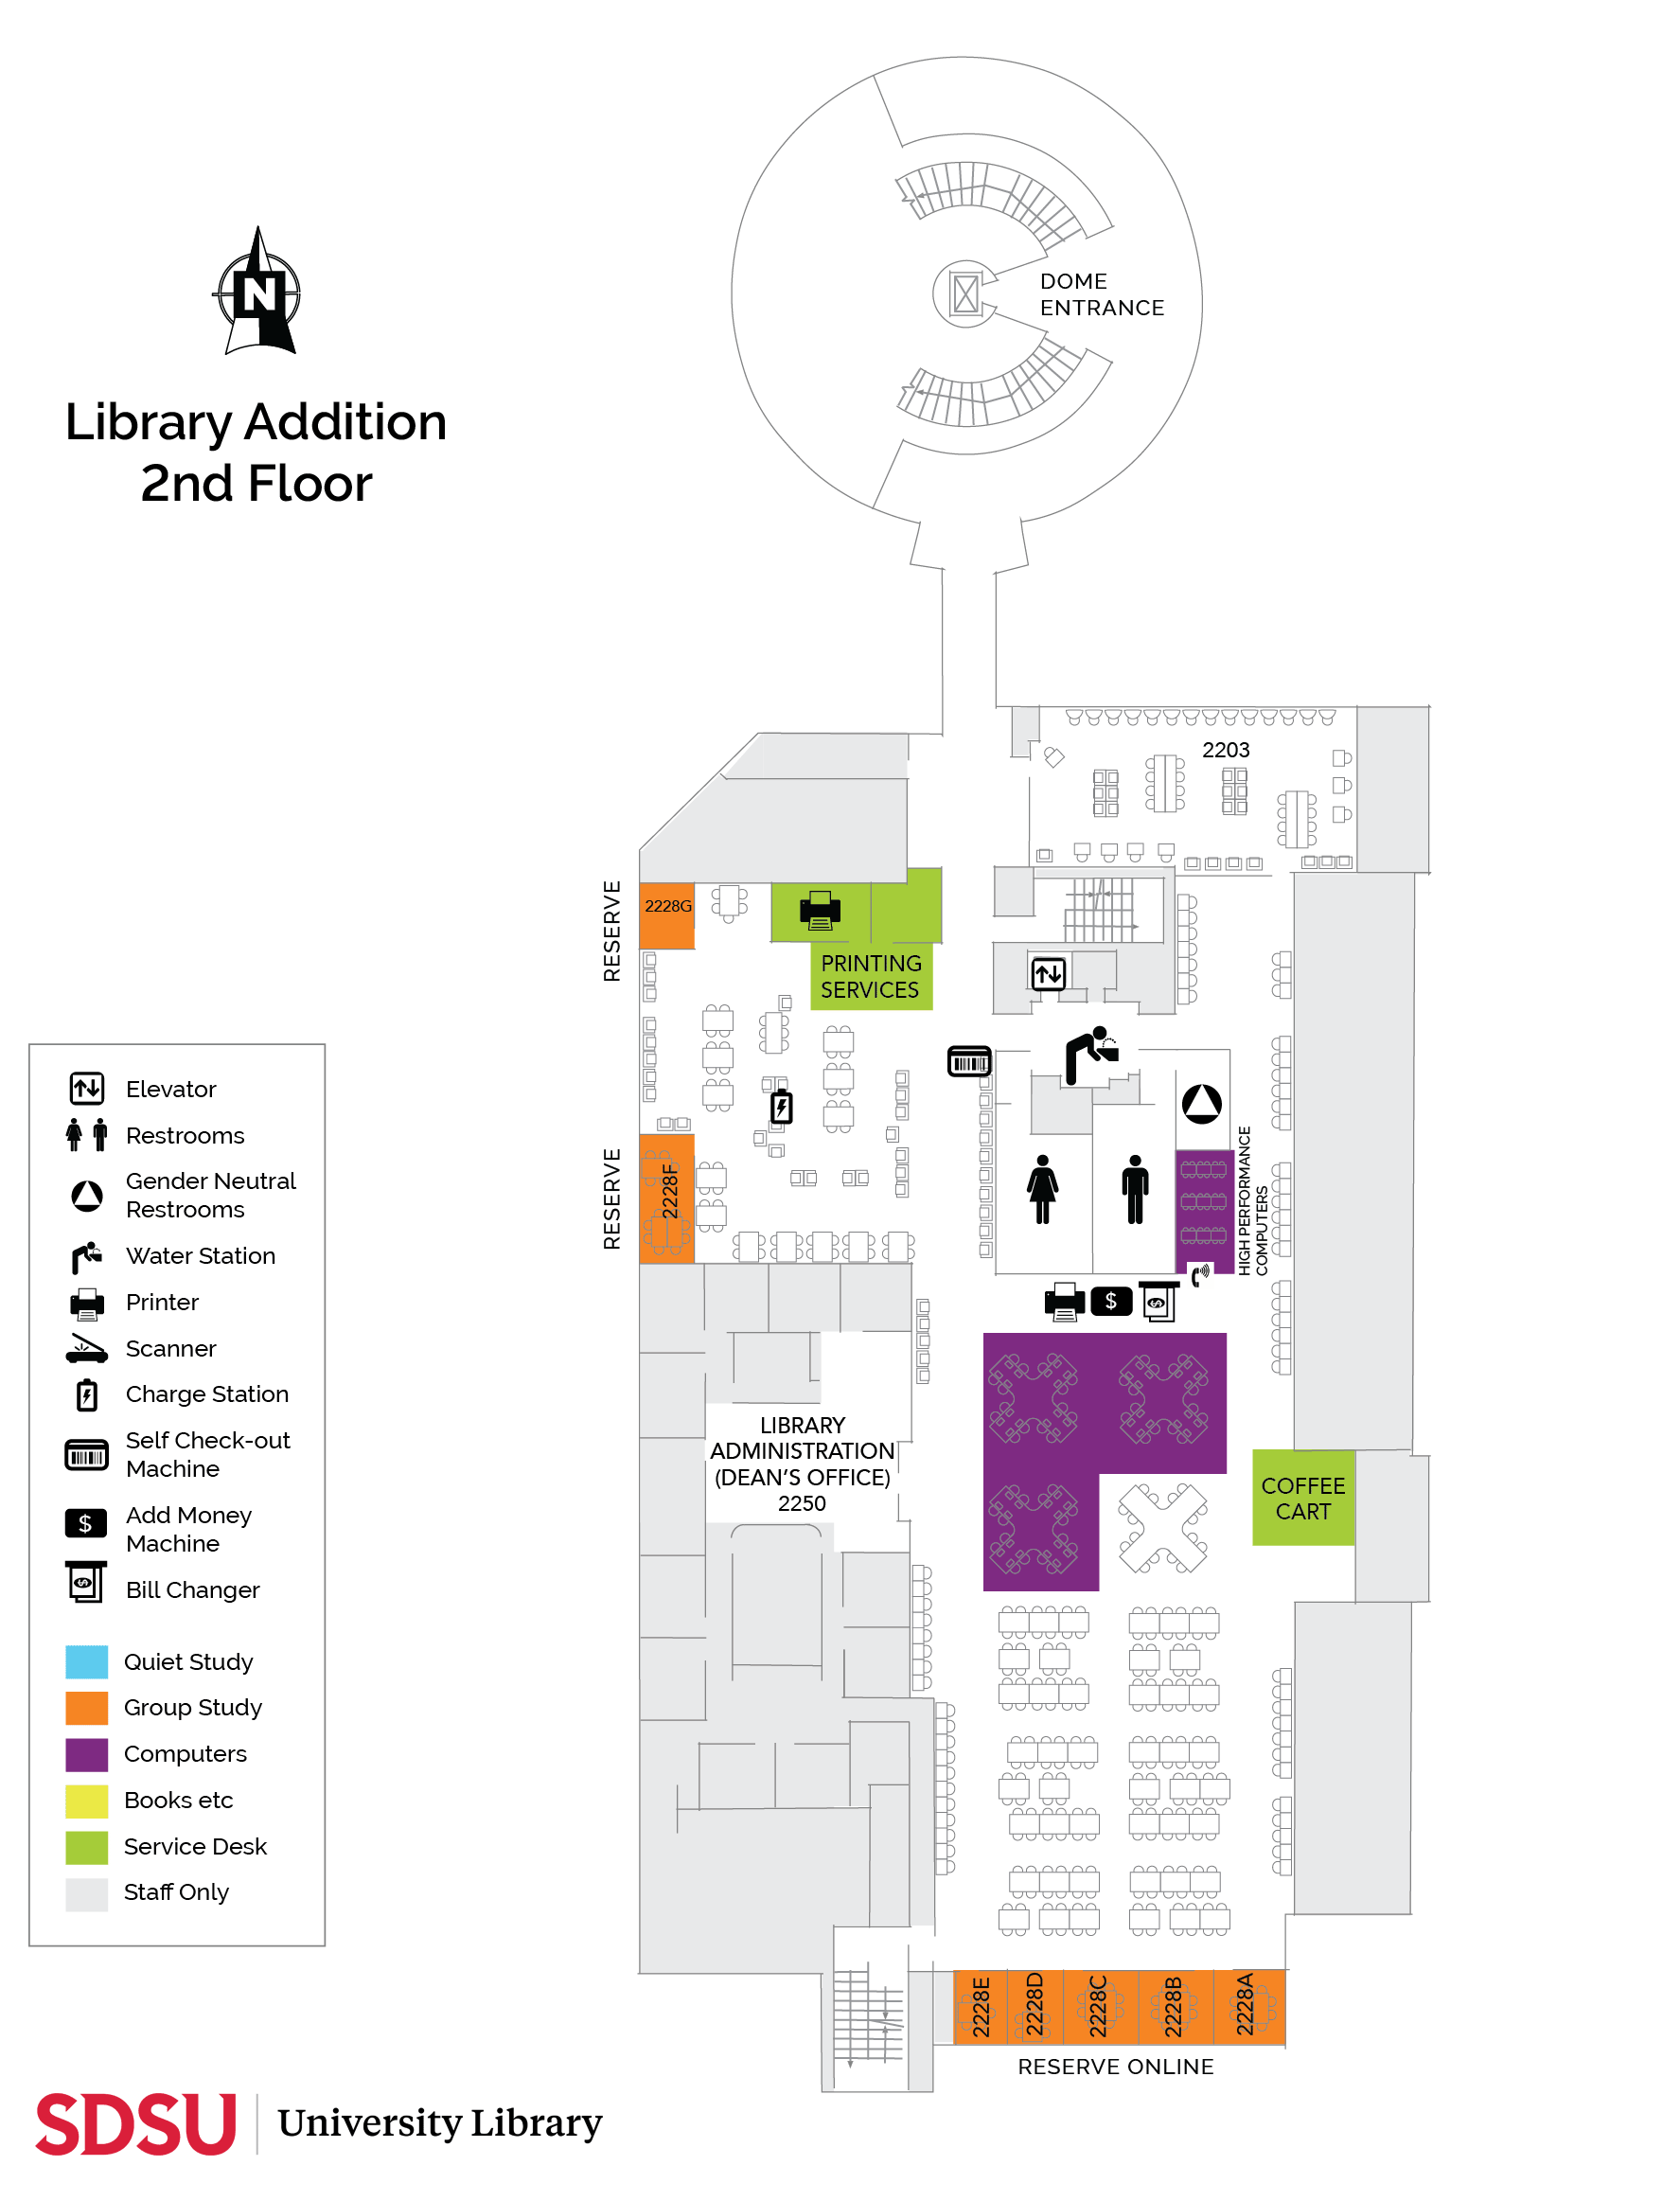 Library Addition 2nd Floor Map